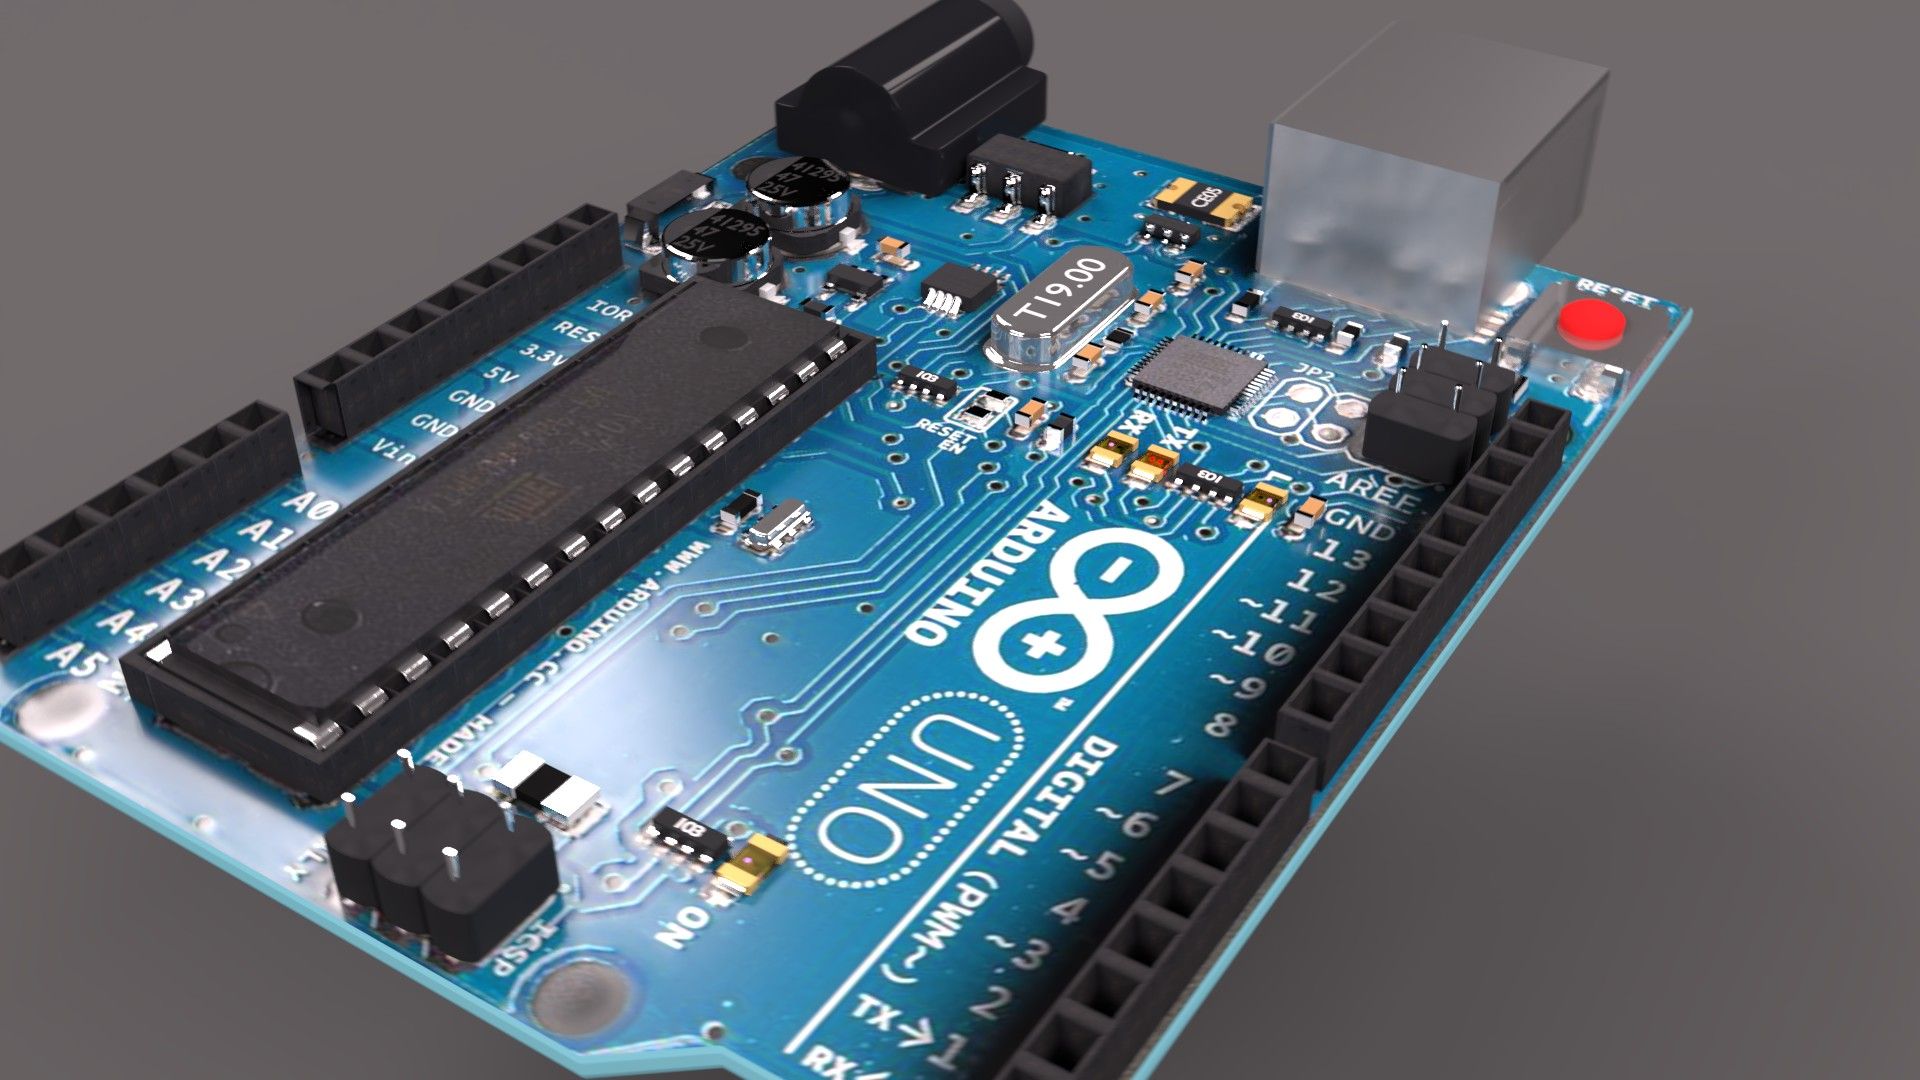 ARDUINO UNO. Arduino, Pic microcontroller, Electronic and communication engineering